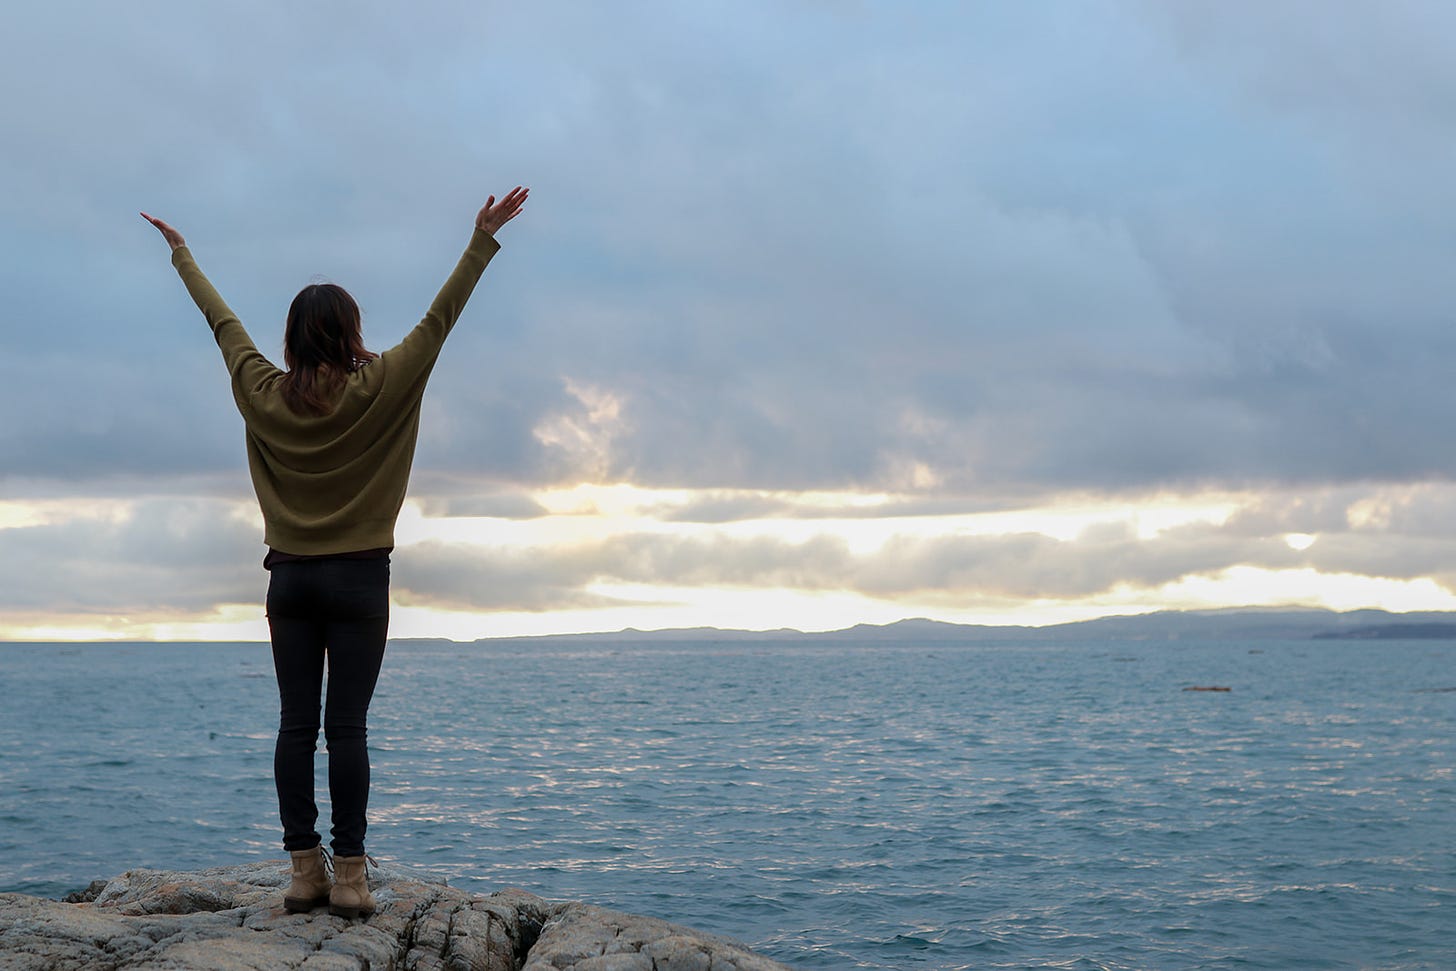 Rayann standing on a rock facing ocean and cloudy sky arms up and outstretched.